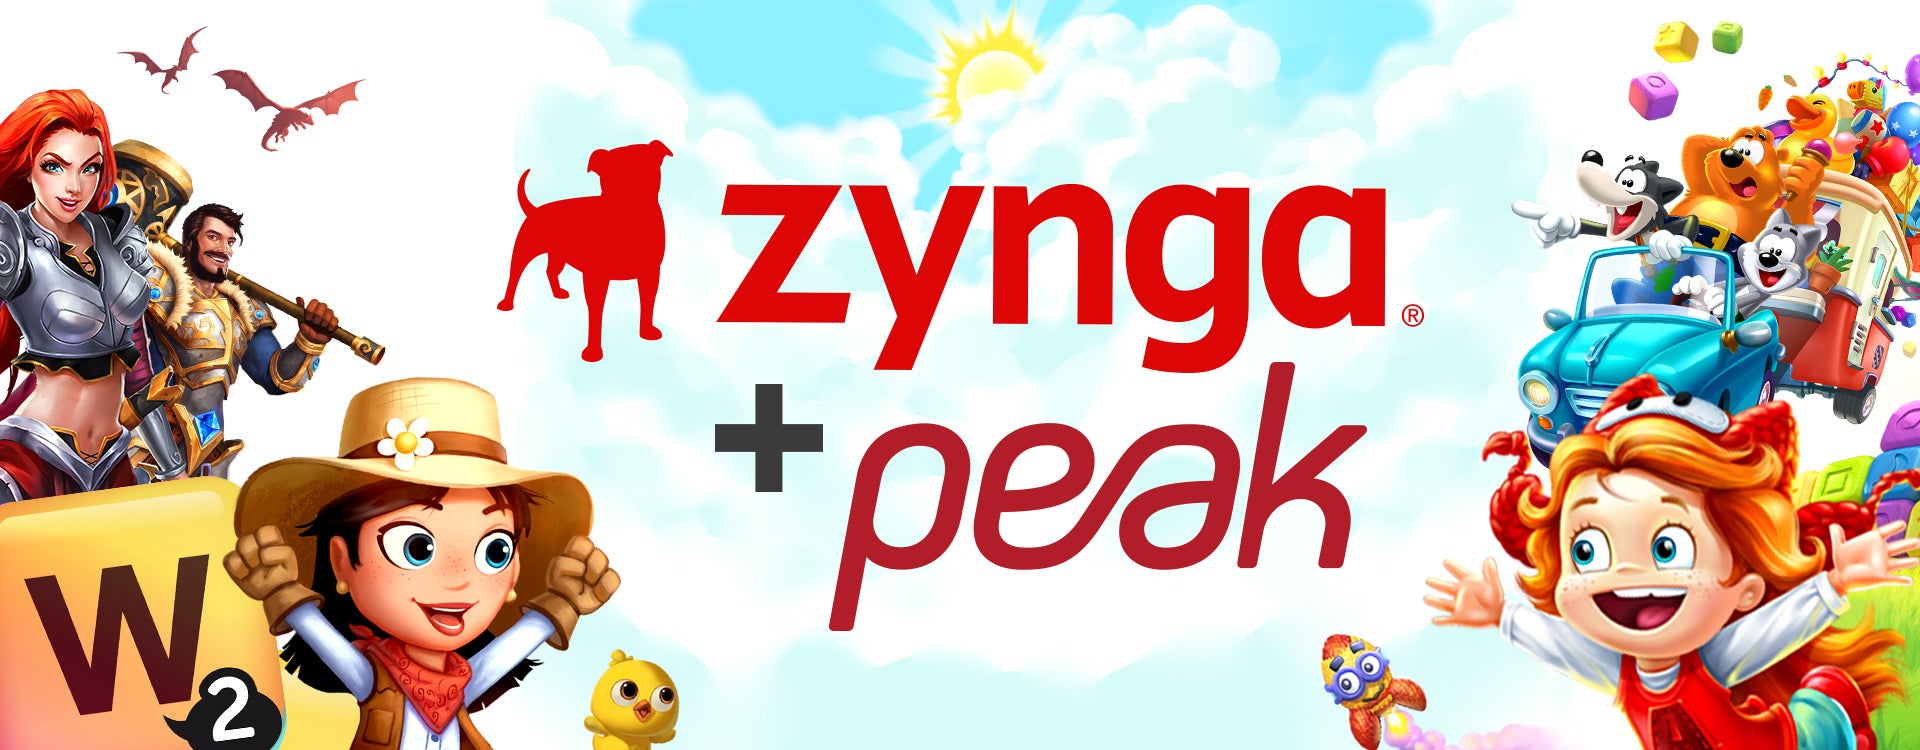 Image for Zynga closes acquisition of Peak for $1.8 billion